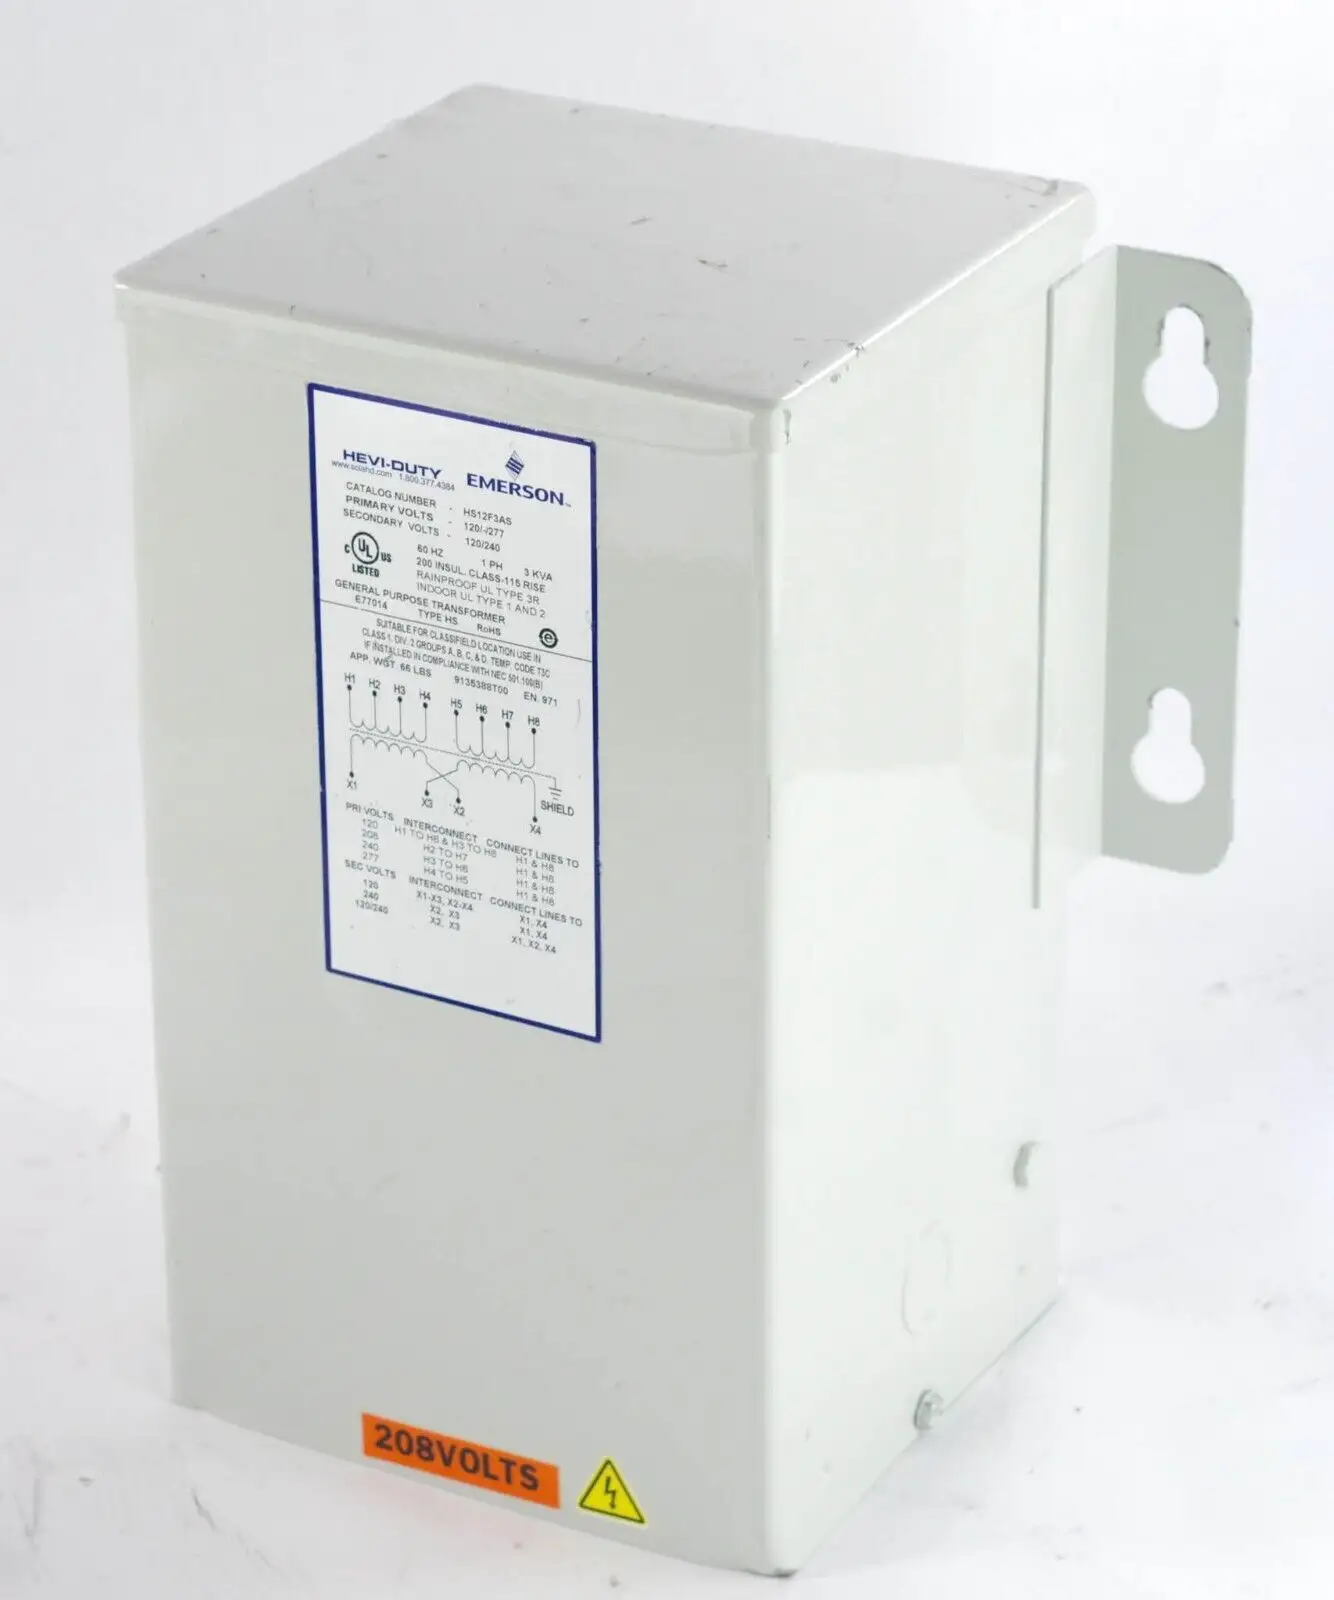 HS12F3AS Wall Mount Transformer 120 277 120/240 - Lightly Used New Unopened 3-7 Days for Delivery DHL EMS